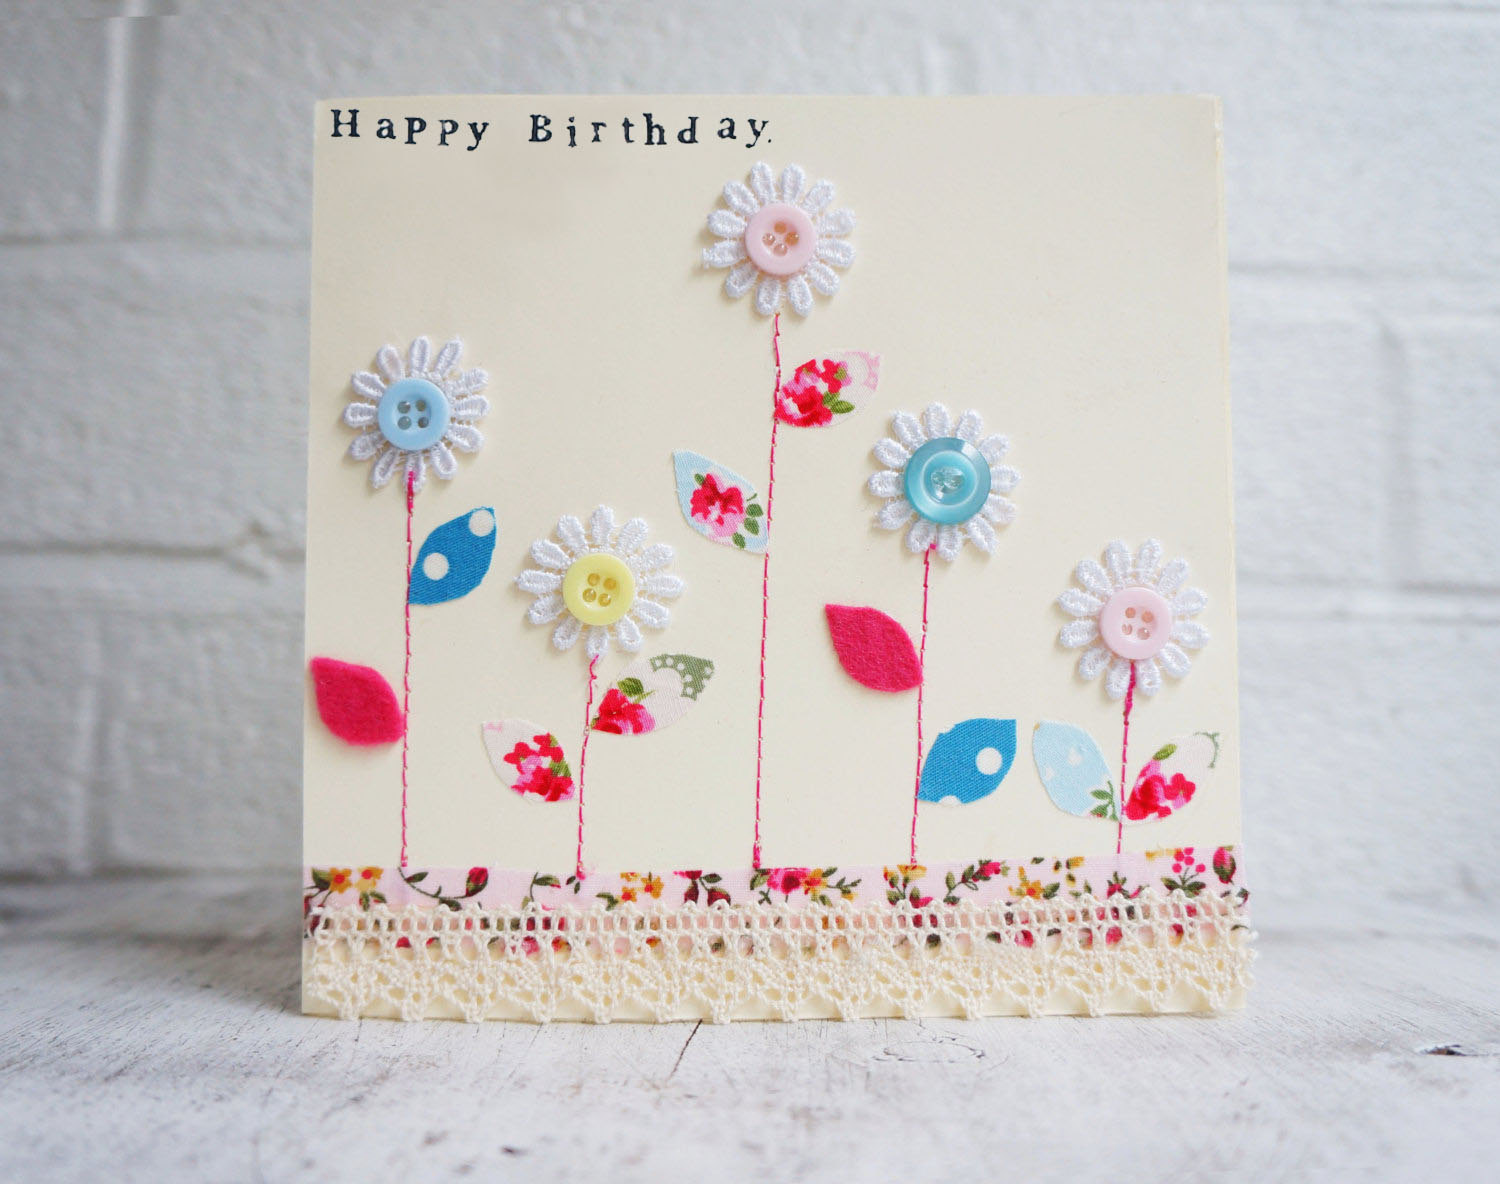 The Collection of Impressive and Beautiful Birthday Cards to Send Your Wishes to Father 3